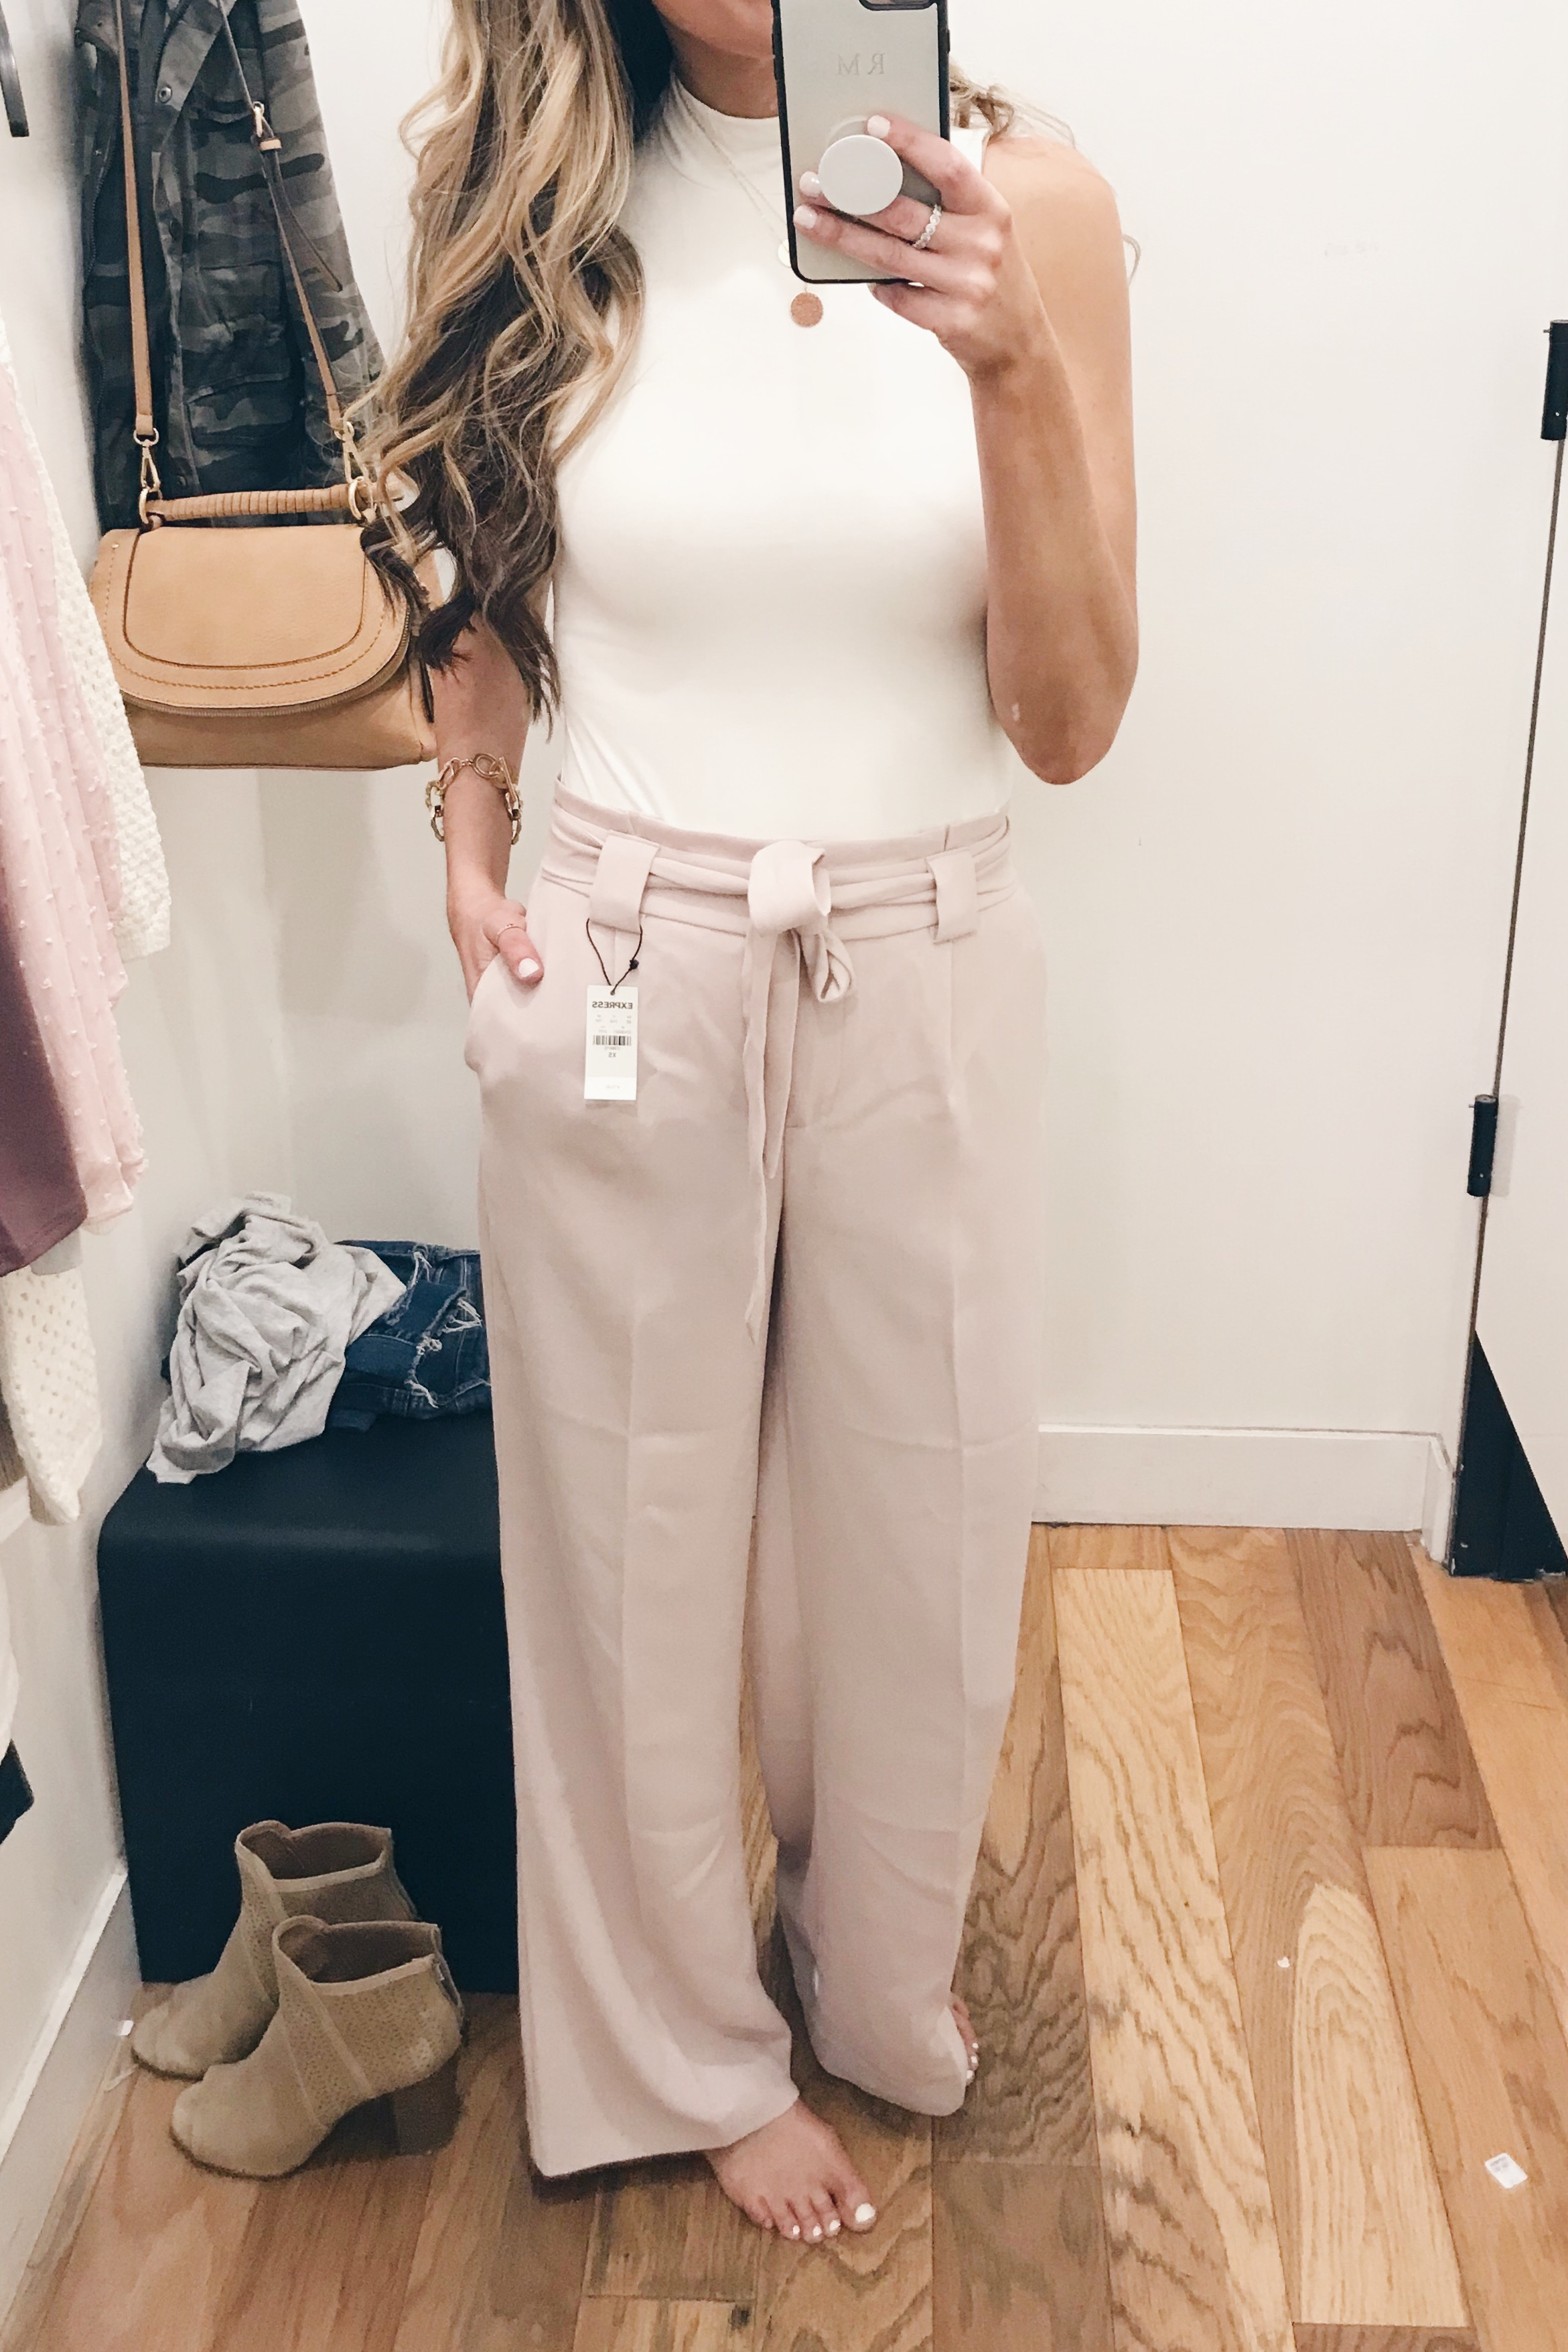 express sale march 2019 try on - wide leg pink pants on Pinteresting Plans blog